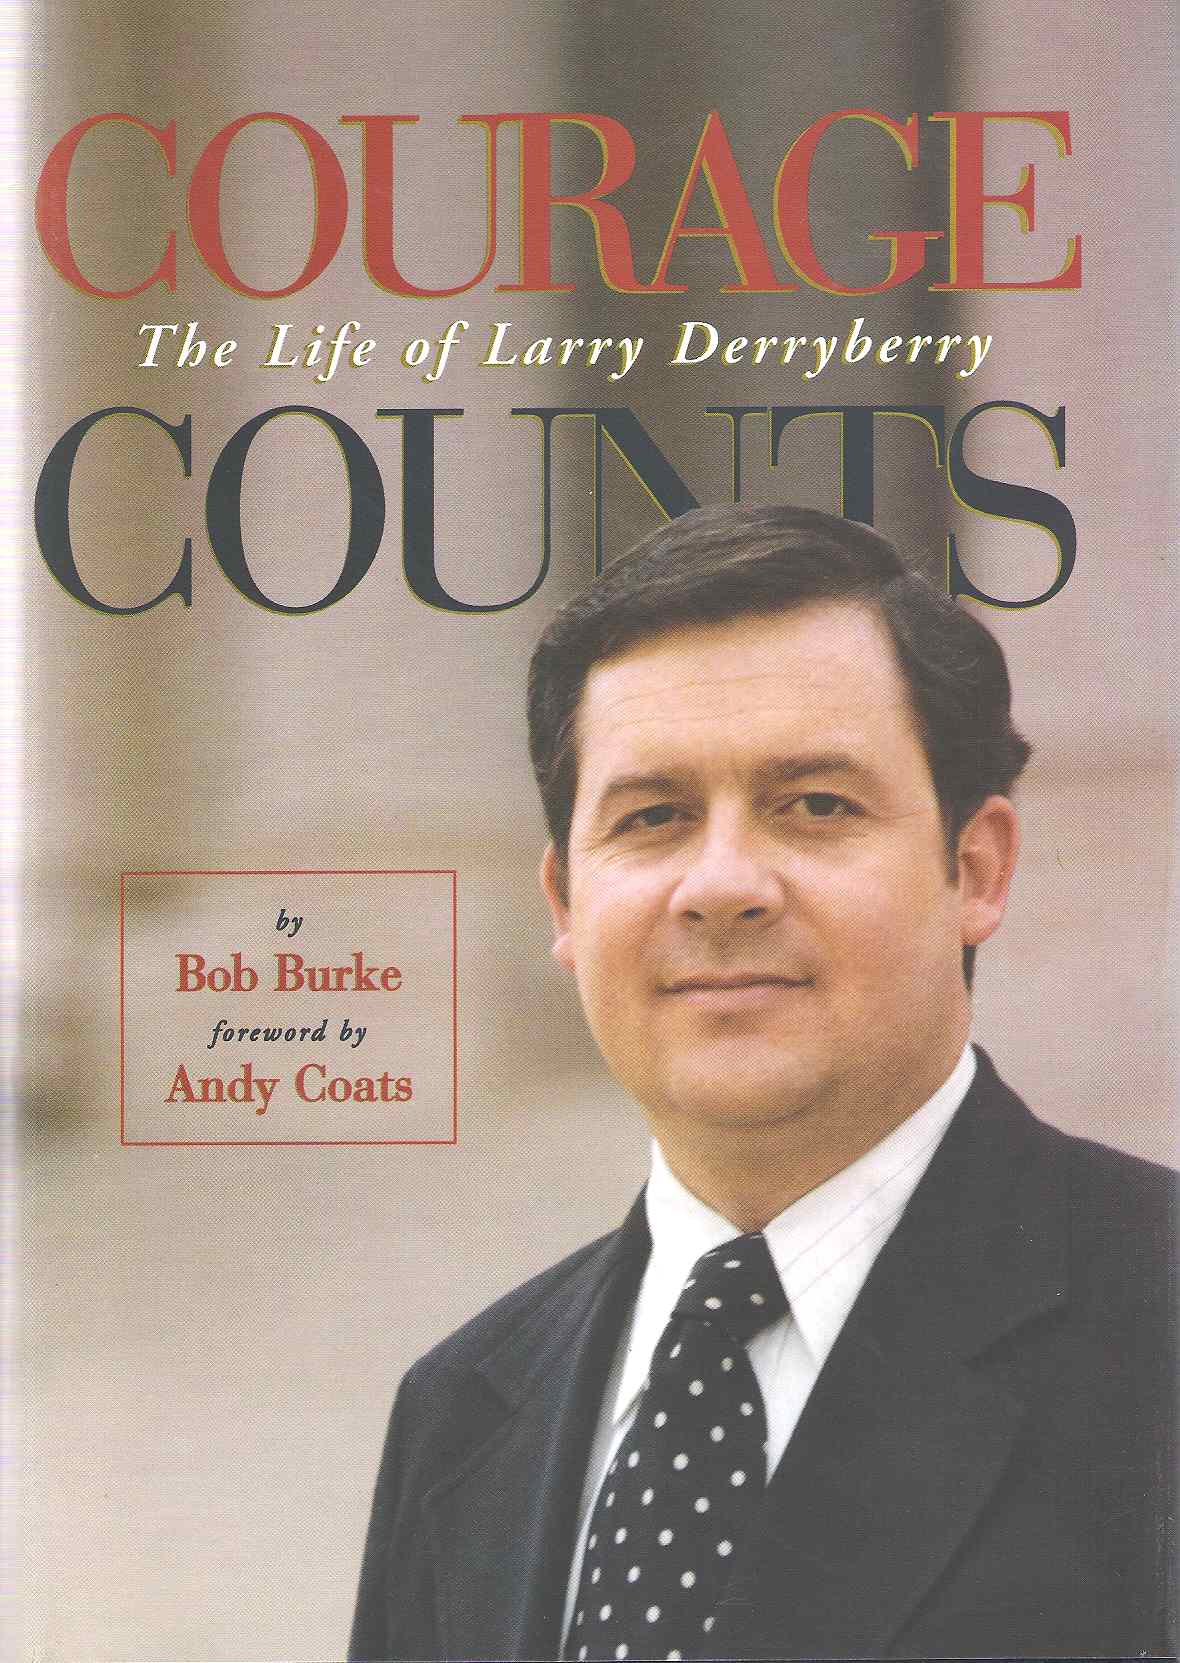 Courage Counts: The Life of Larry Derryberry